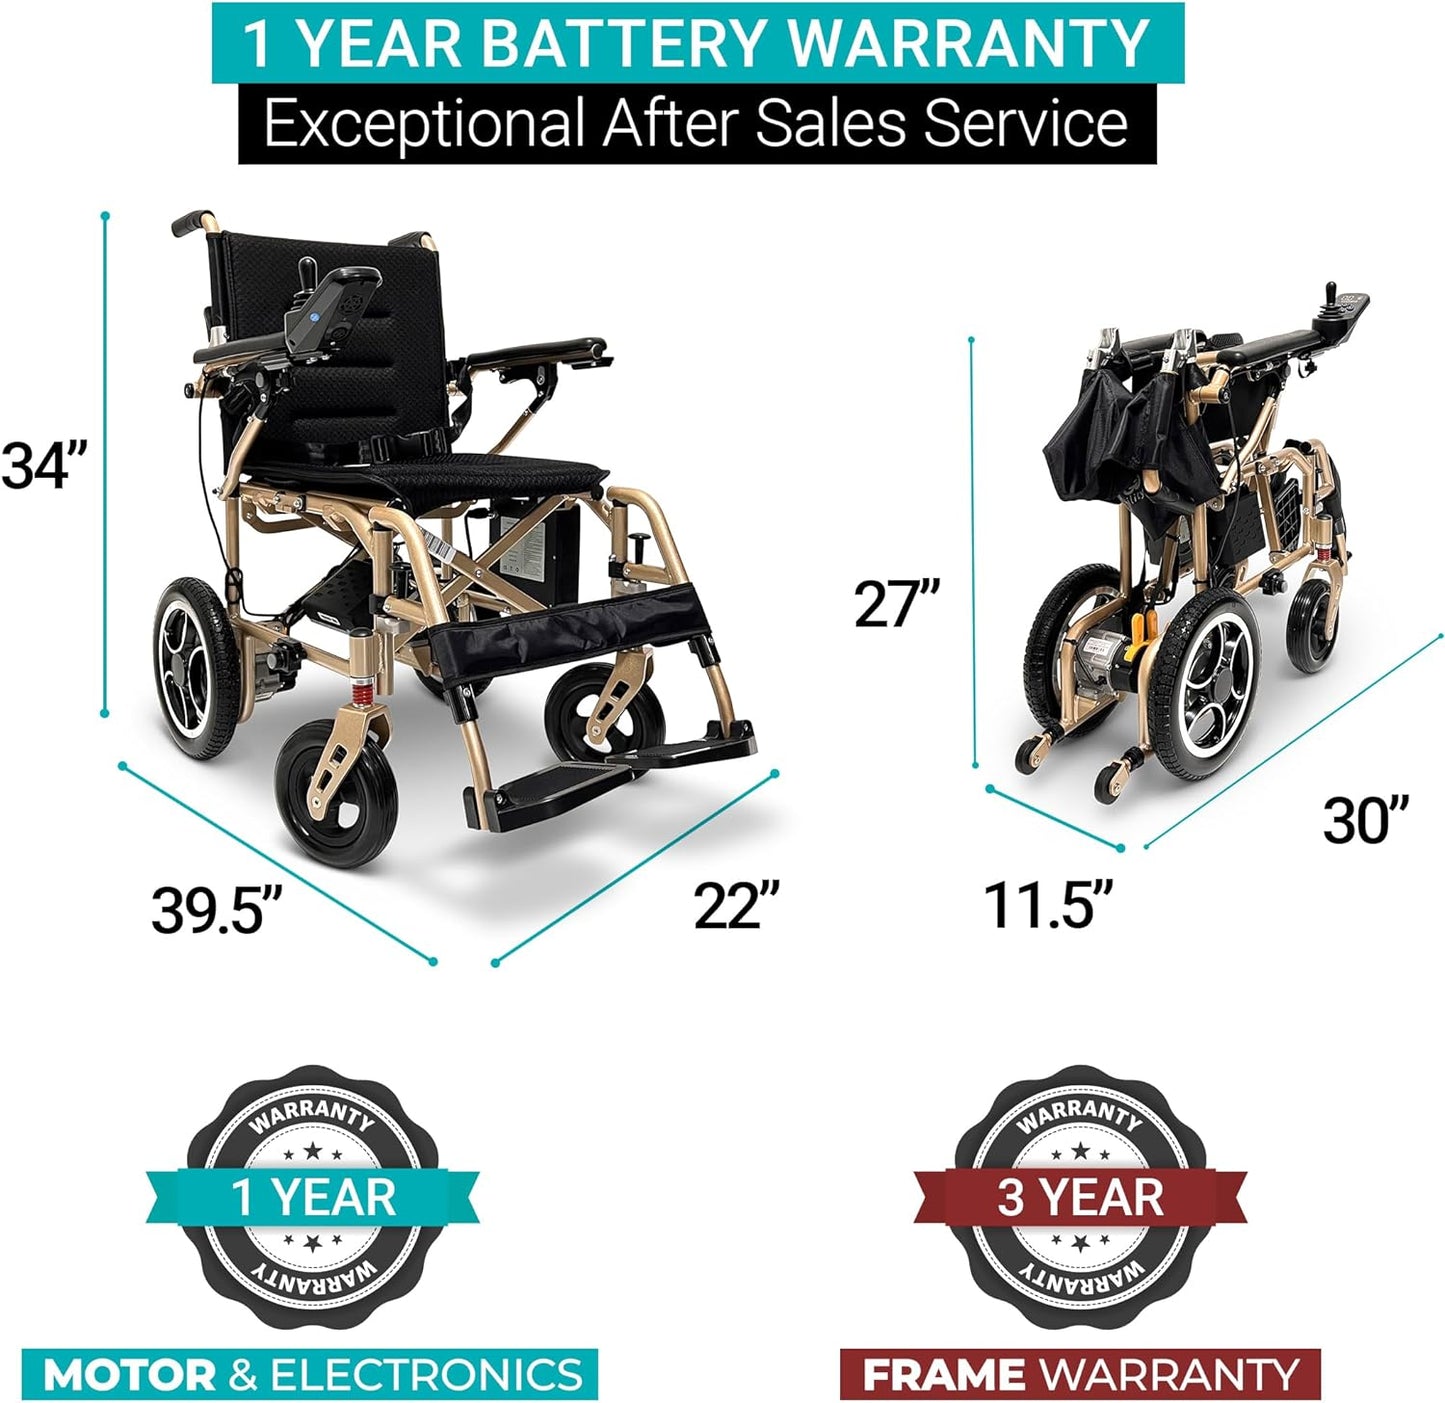 Wheelchair - Comfygo X-7 Electric Wheelchairs for Adults,Electric Power Wheel Chair, Folding Motorized Wheelchair,Ultra Light Wheelchair for Seniors,Lightweight Electric Wheelchair,19 Miles Long Travel Range